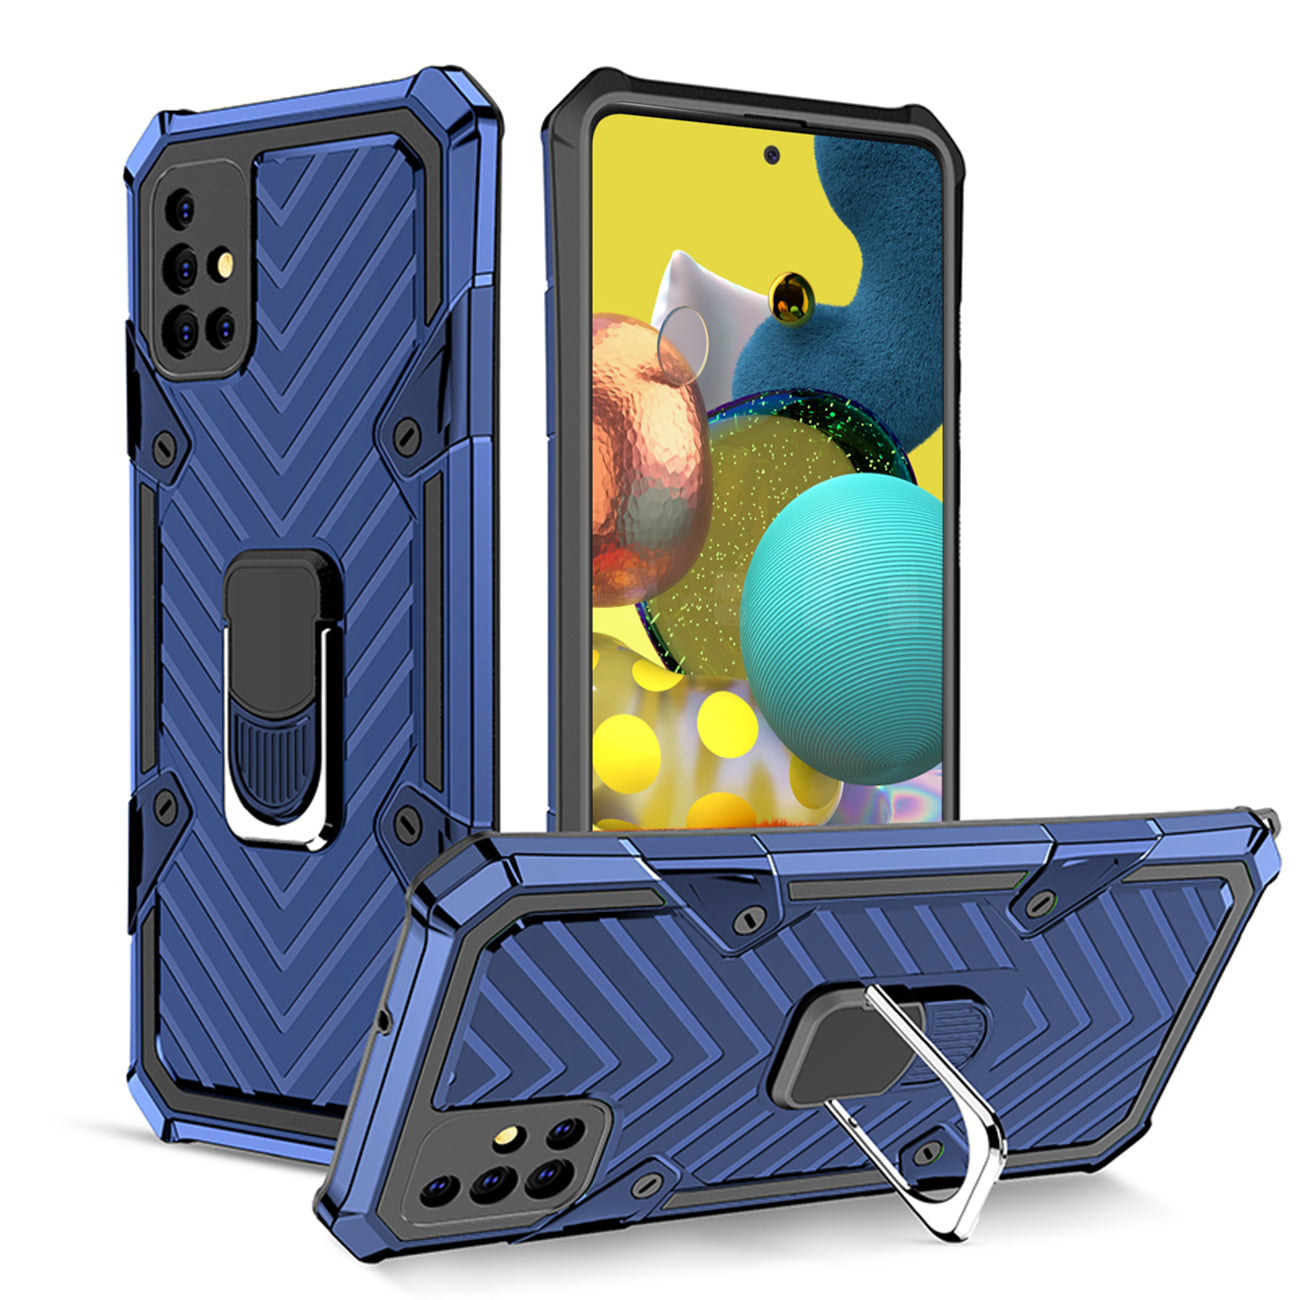 Reiko Kickstand Anti-Shock And Anti Falling Case for SAMSUNG GALAXY A51 5G In Blue